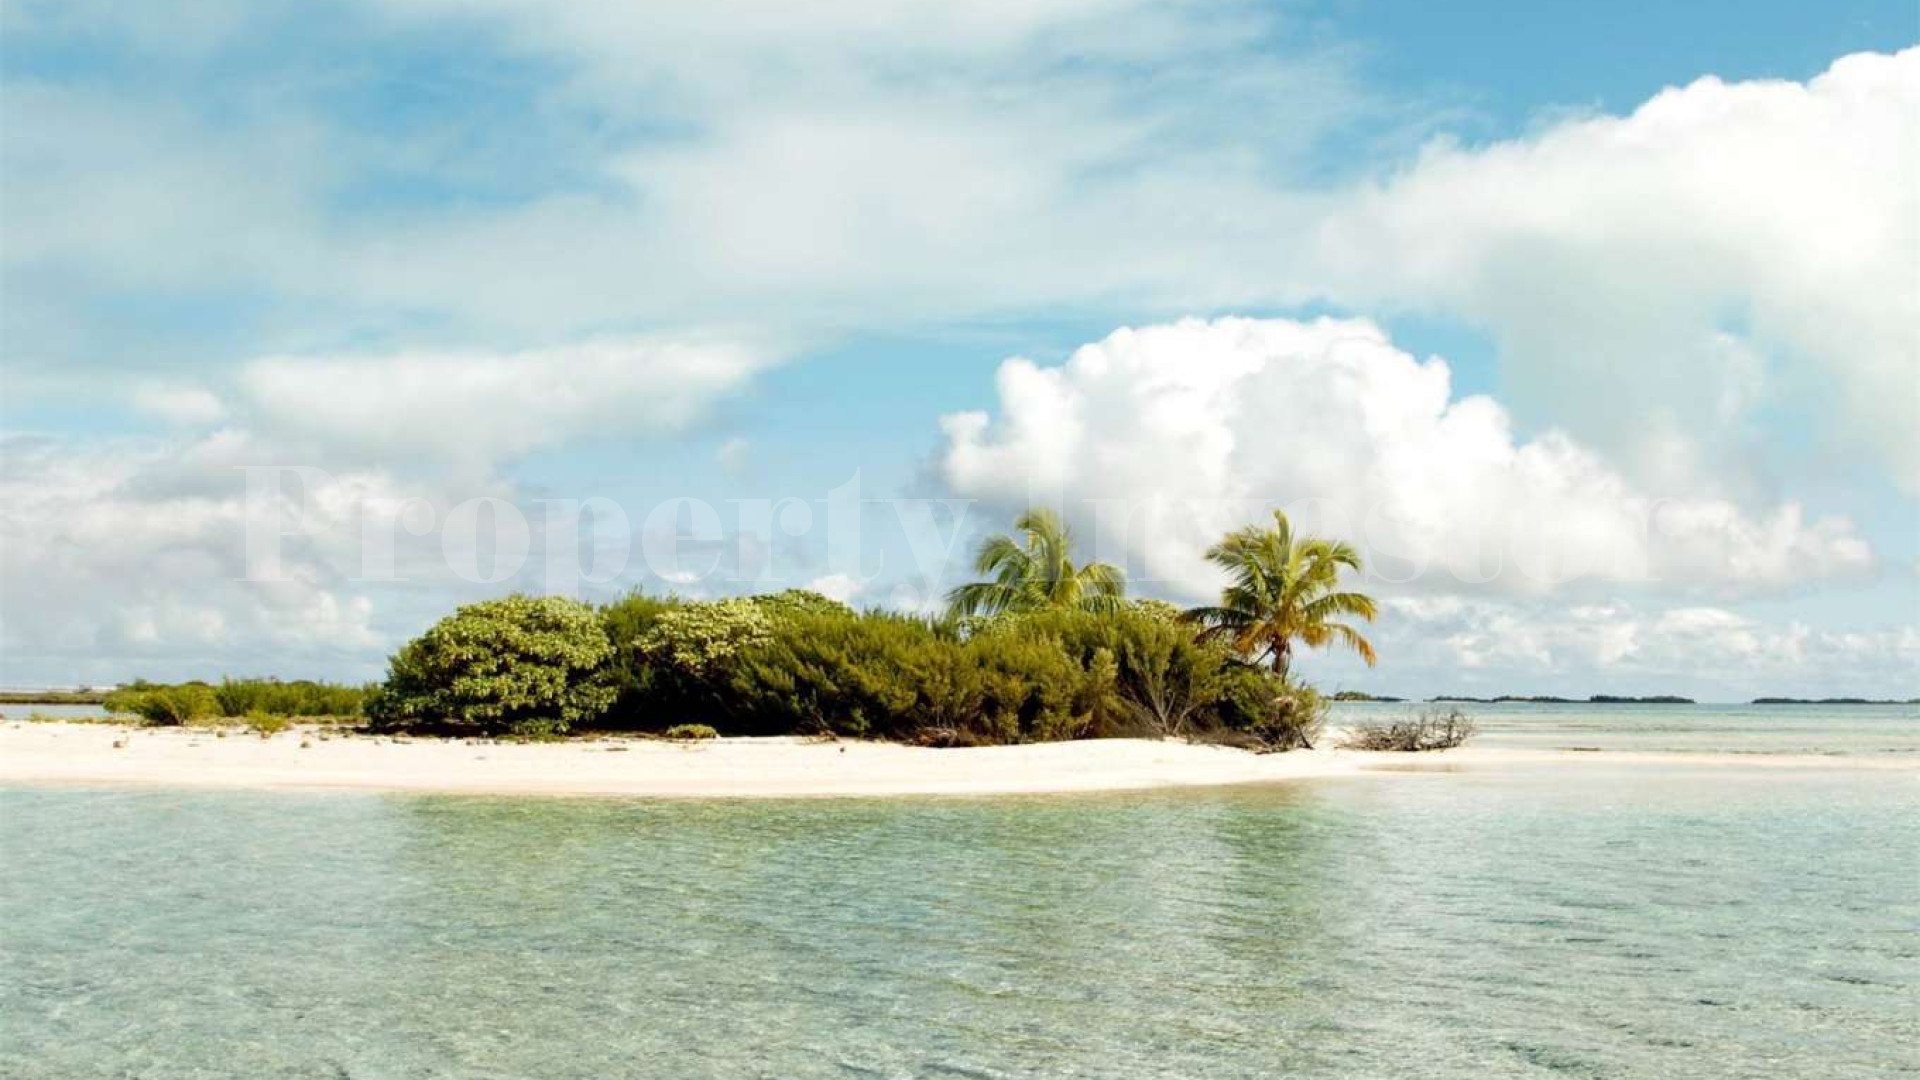 Beautiful 0.7 Hectare Virgin Island for Sale in French Polynesia